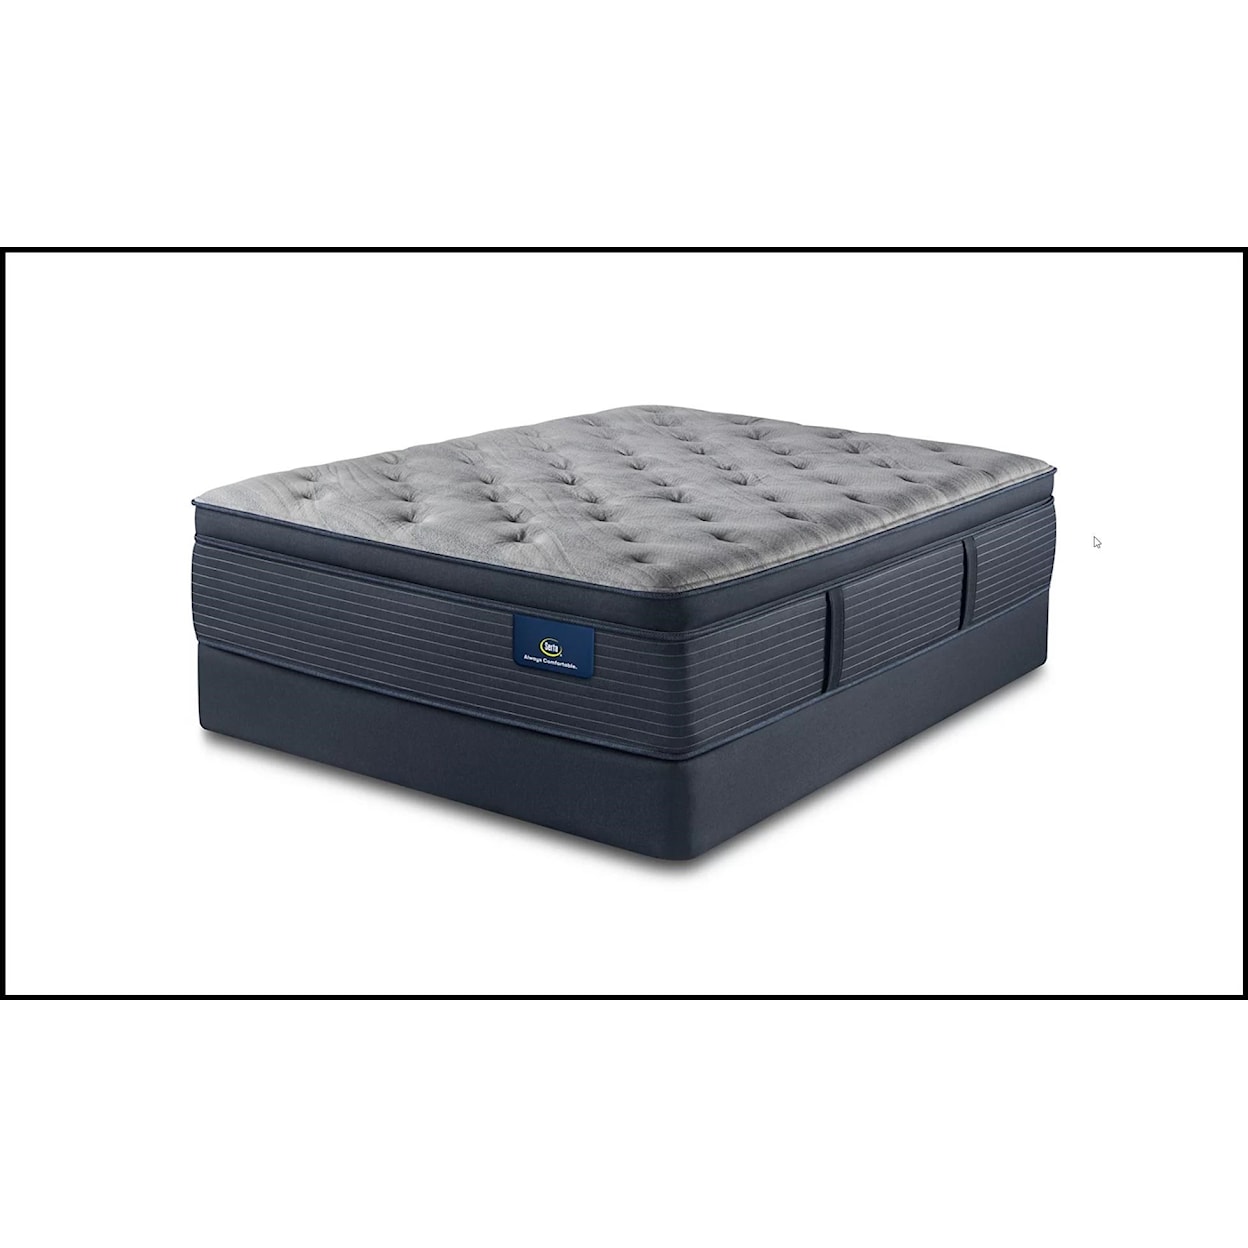 Serta Soothing Rest Soothing Rest Plush PillowTop Queen Mattress